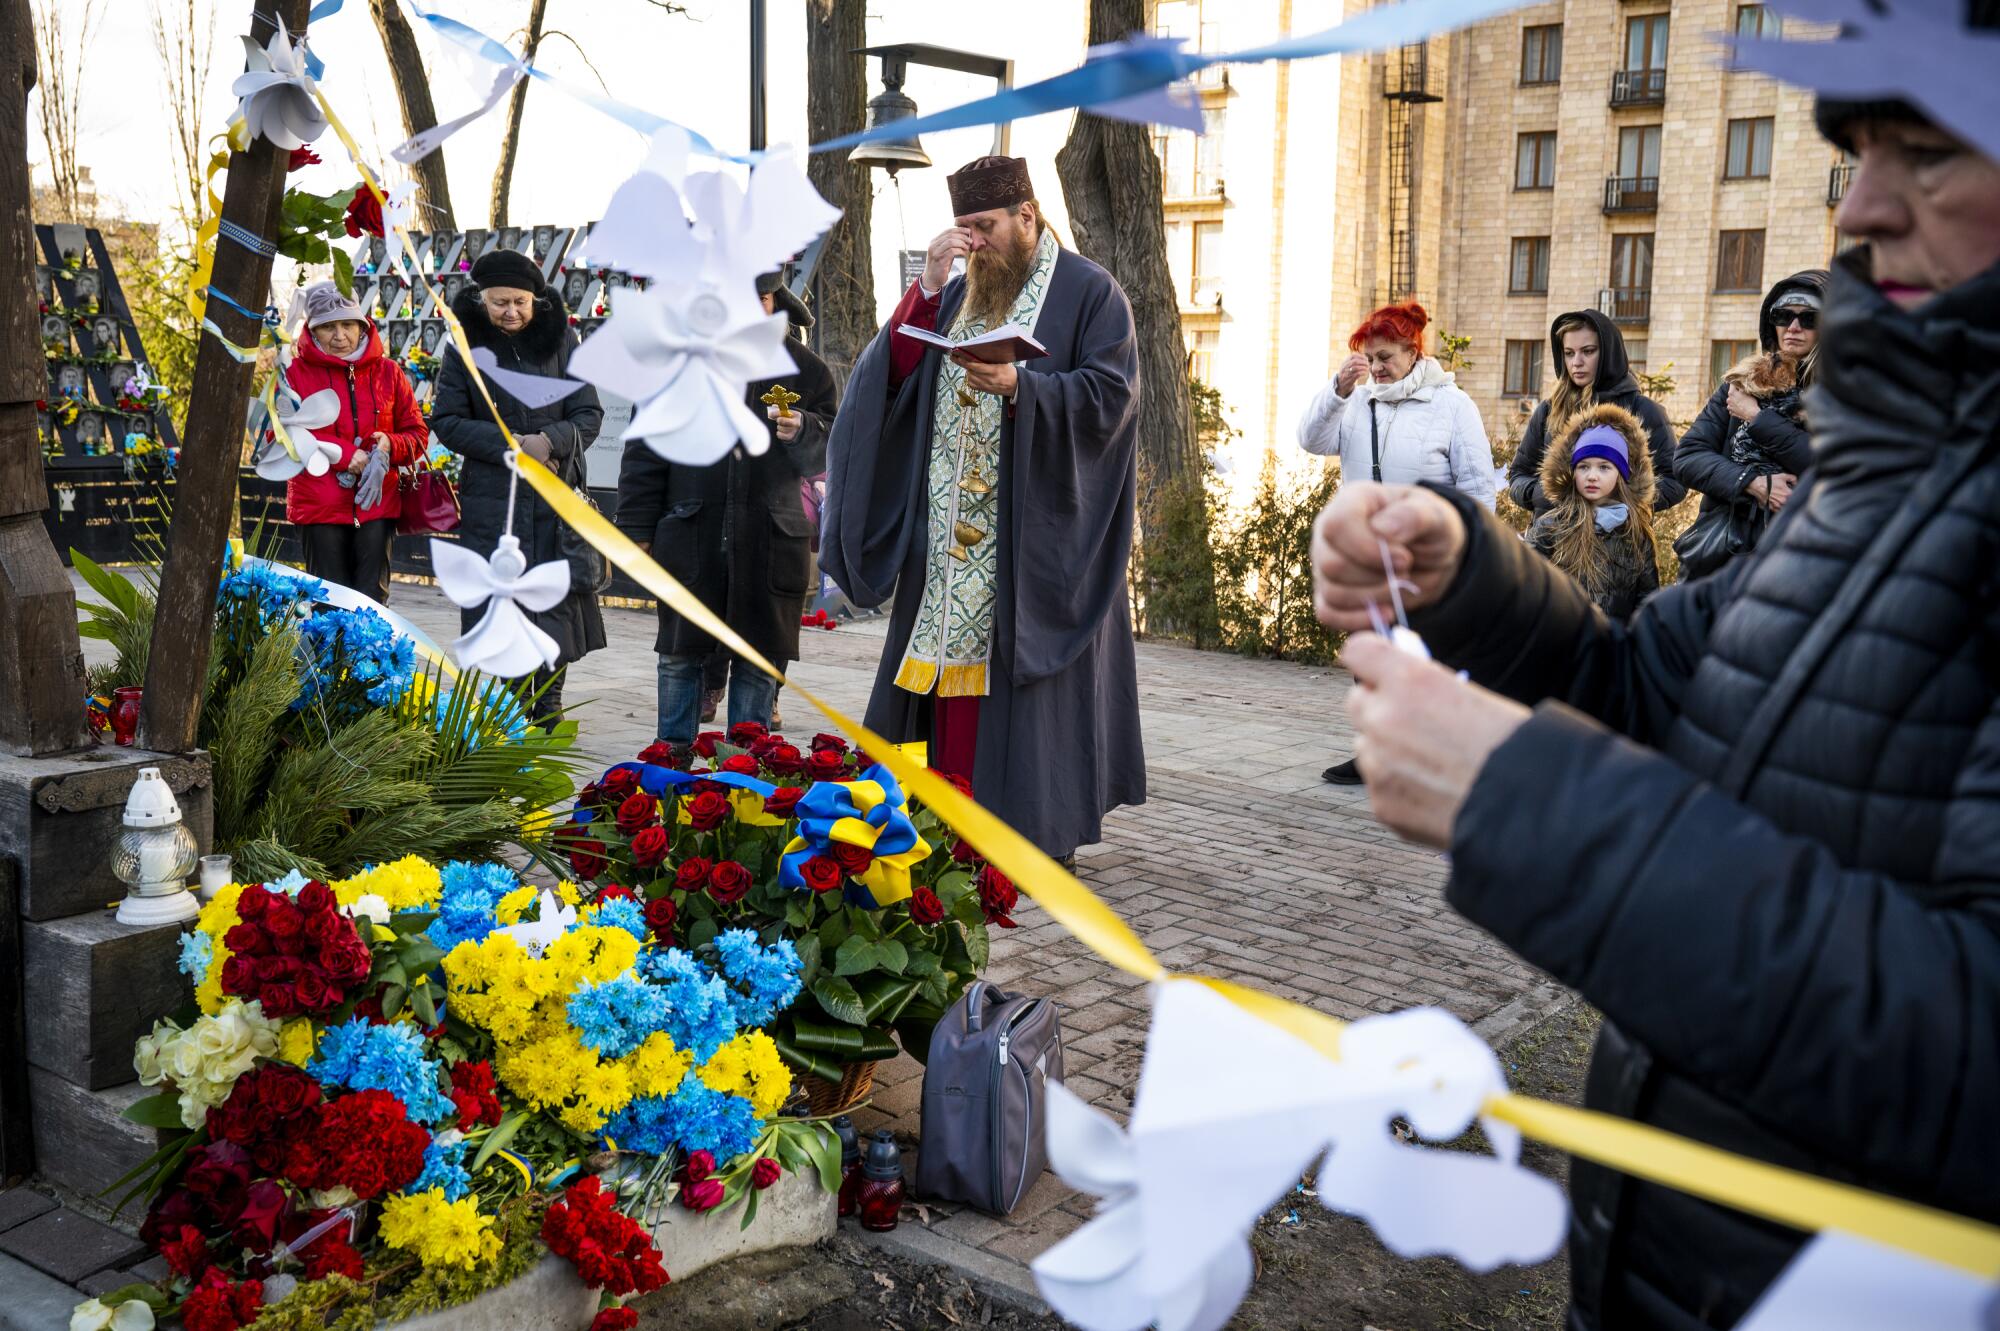 A priest leads a prayer service on a street decorated with flowers, some petals bearing the blue and yellow of Ukraine's flag